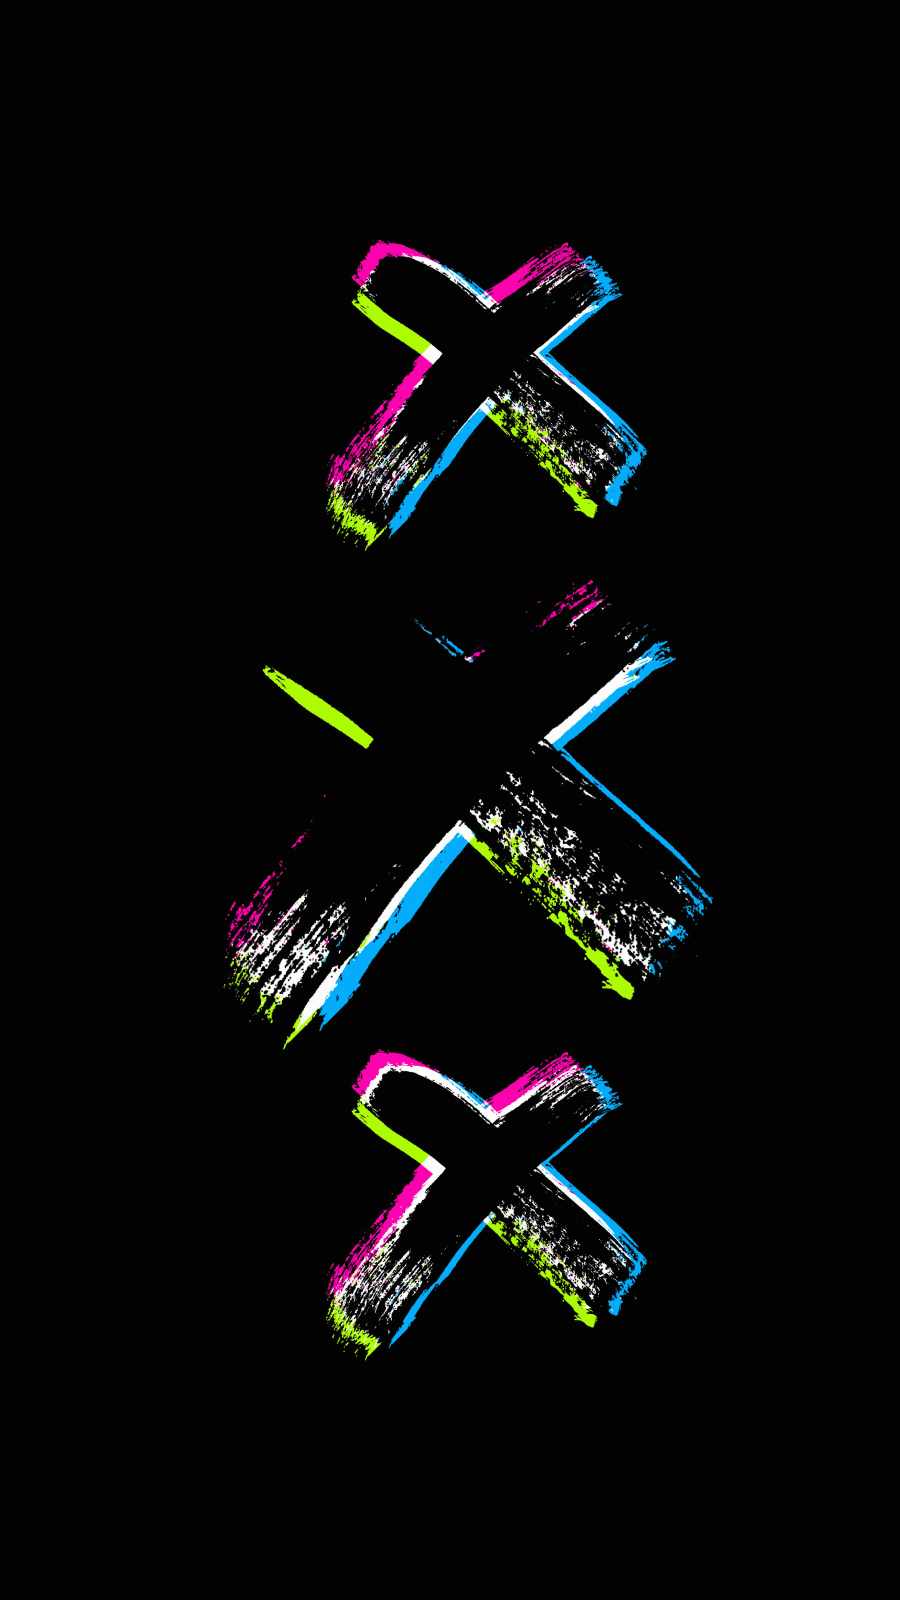 Cross Amoled IPhone Wallpaper - IPhone Wallpapers : iPhone Wallpapers